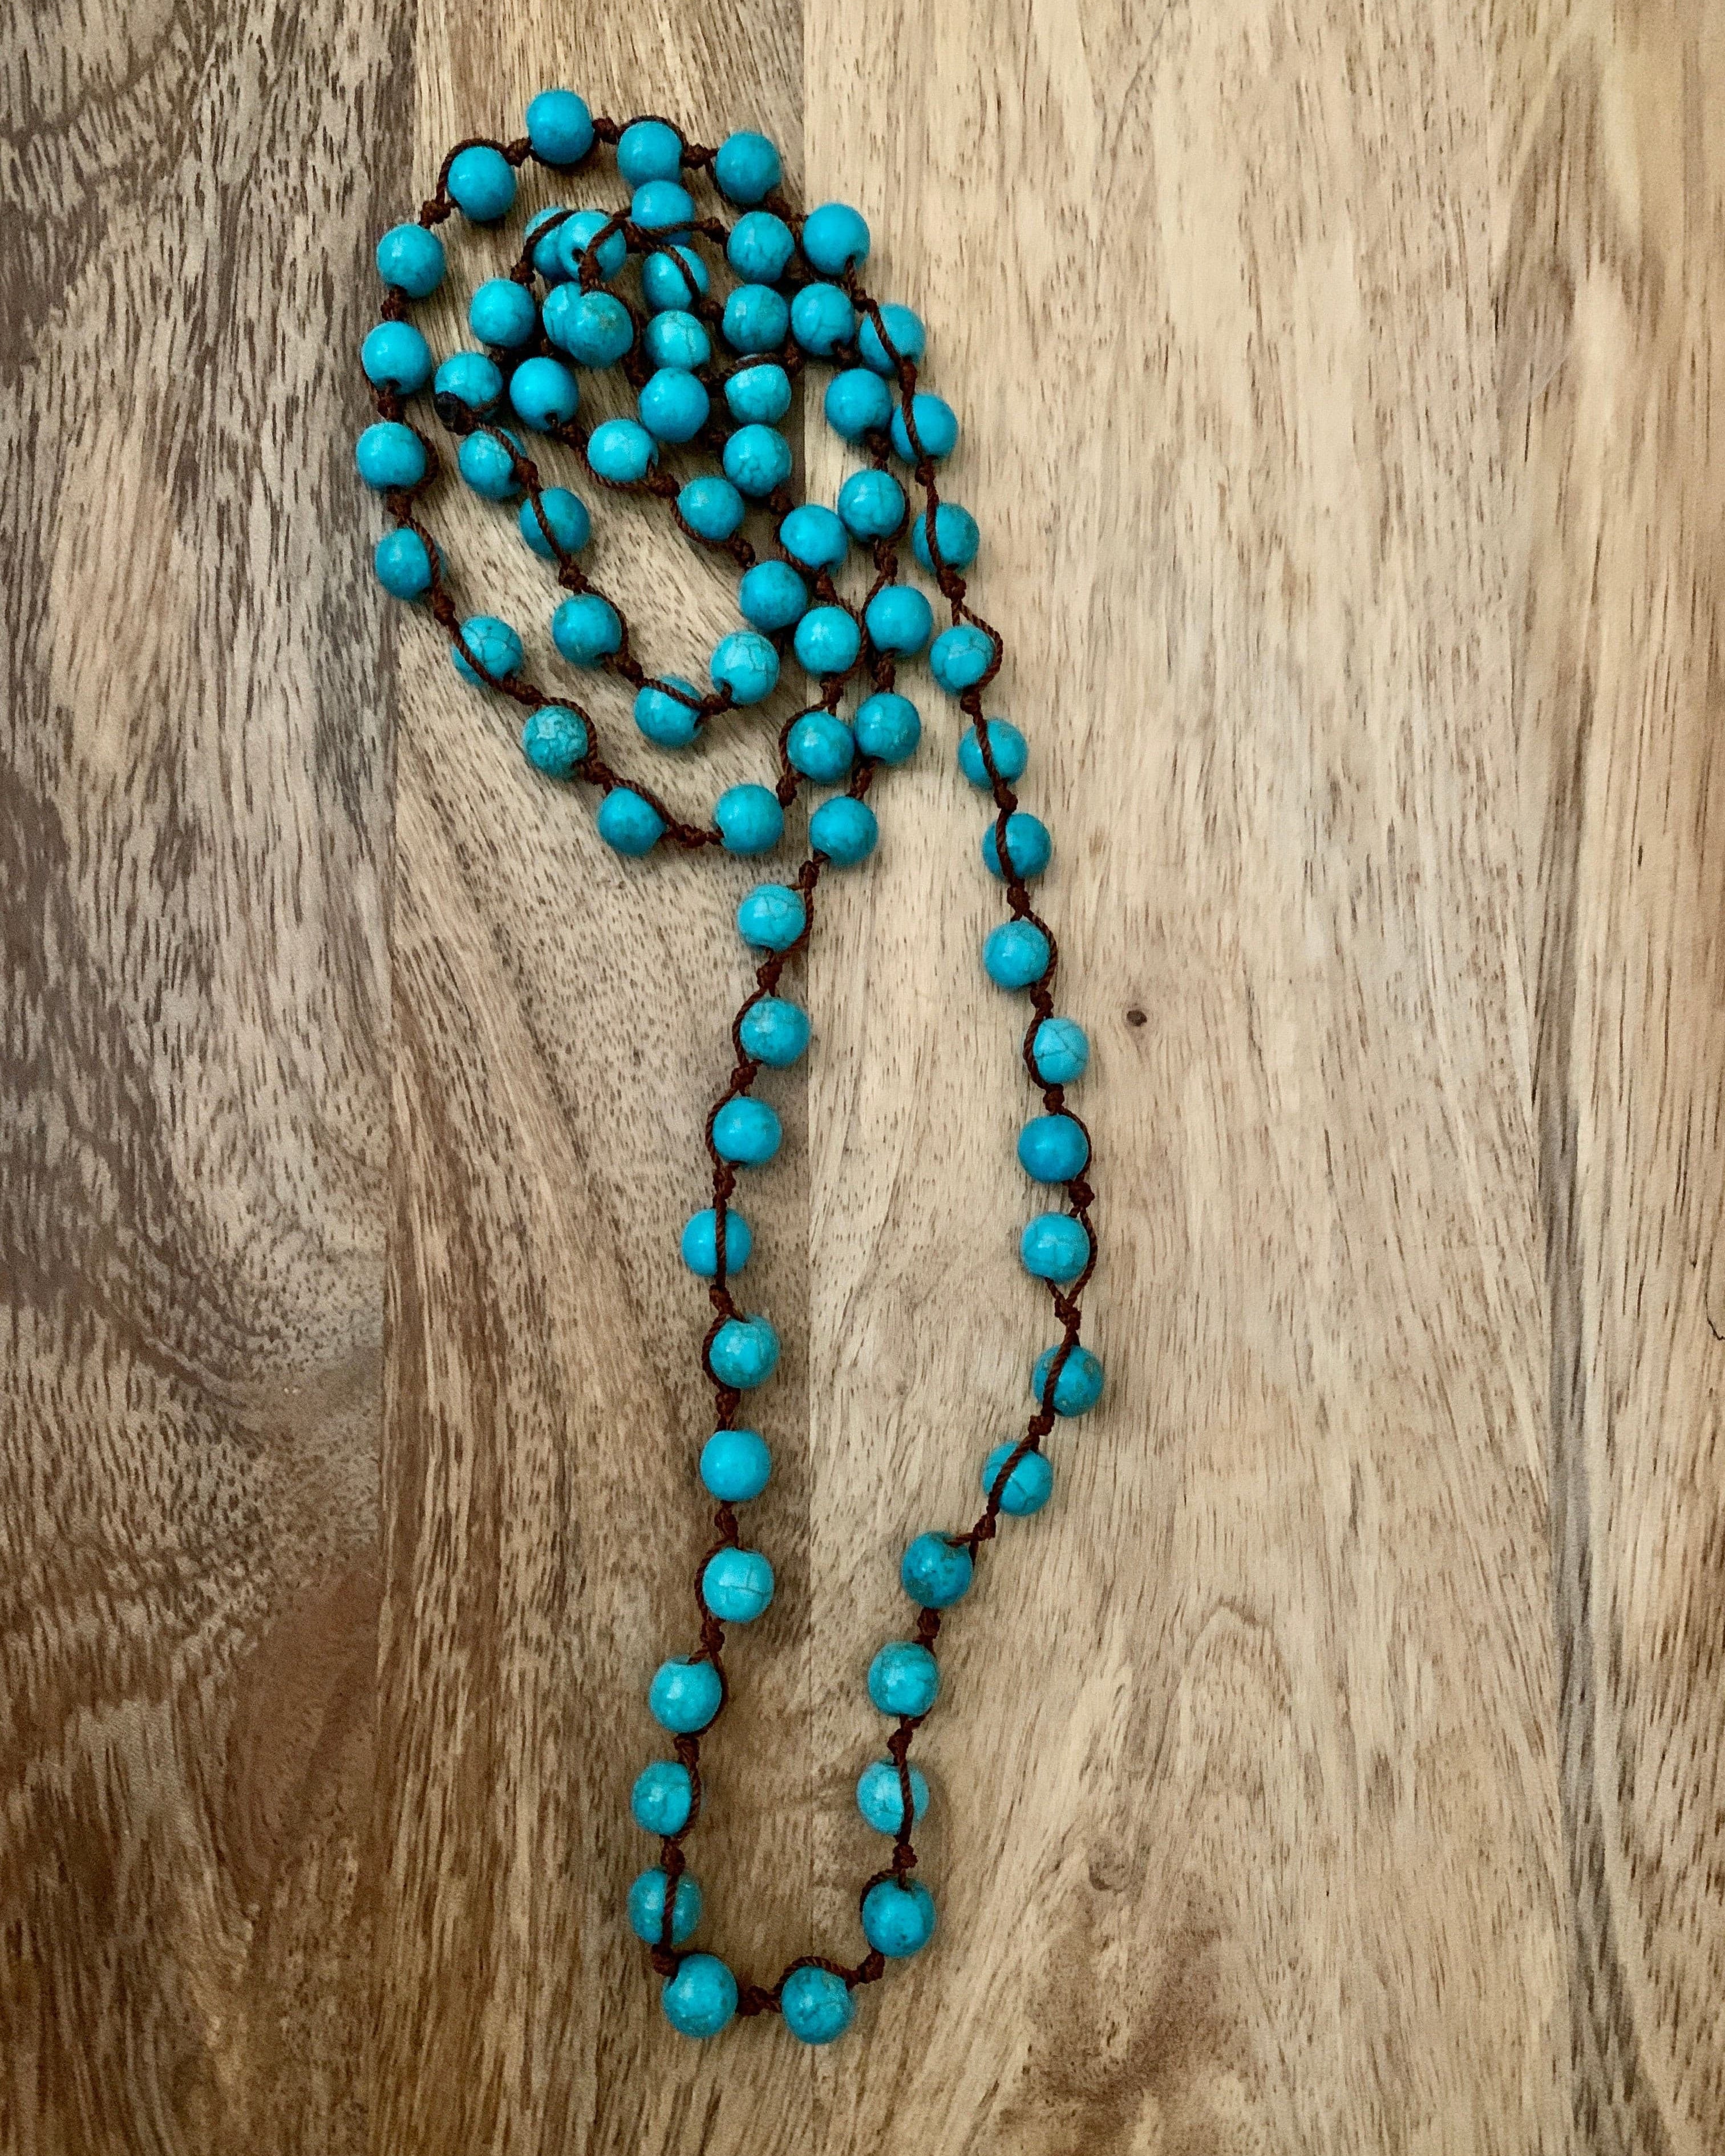 Turquoise Bead Necklace.